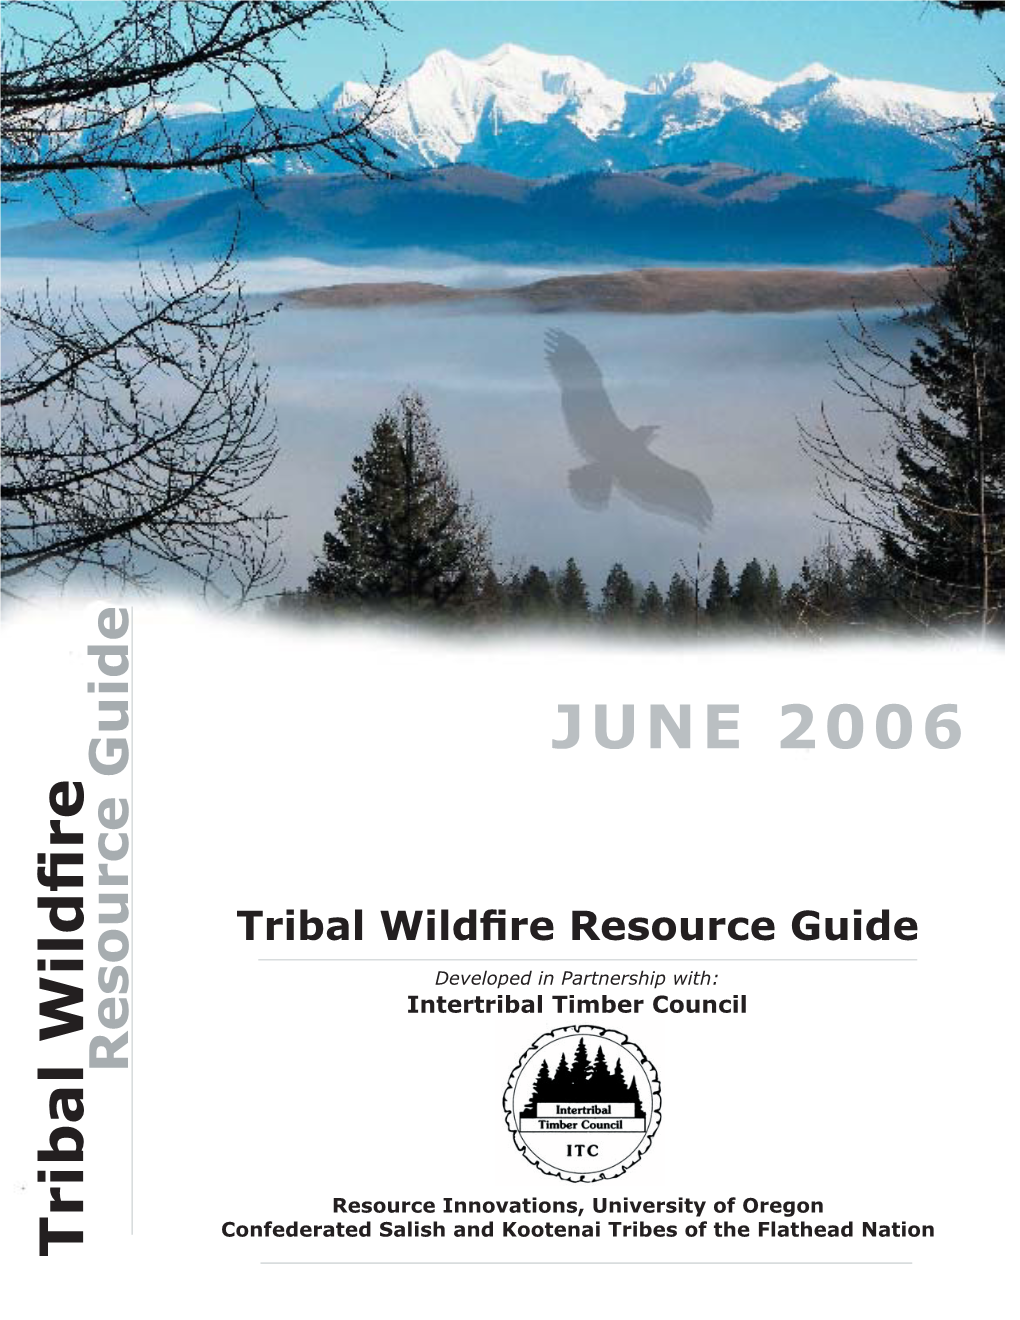 Tribal Wildfire Resource Guide